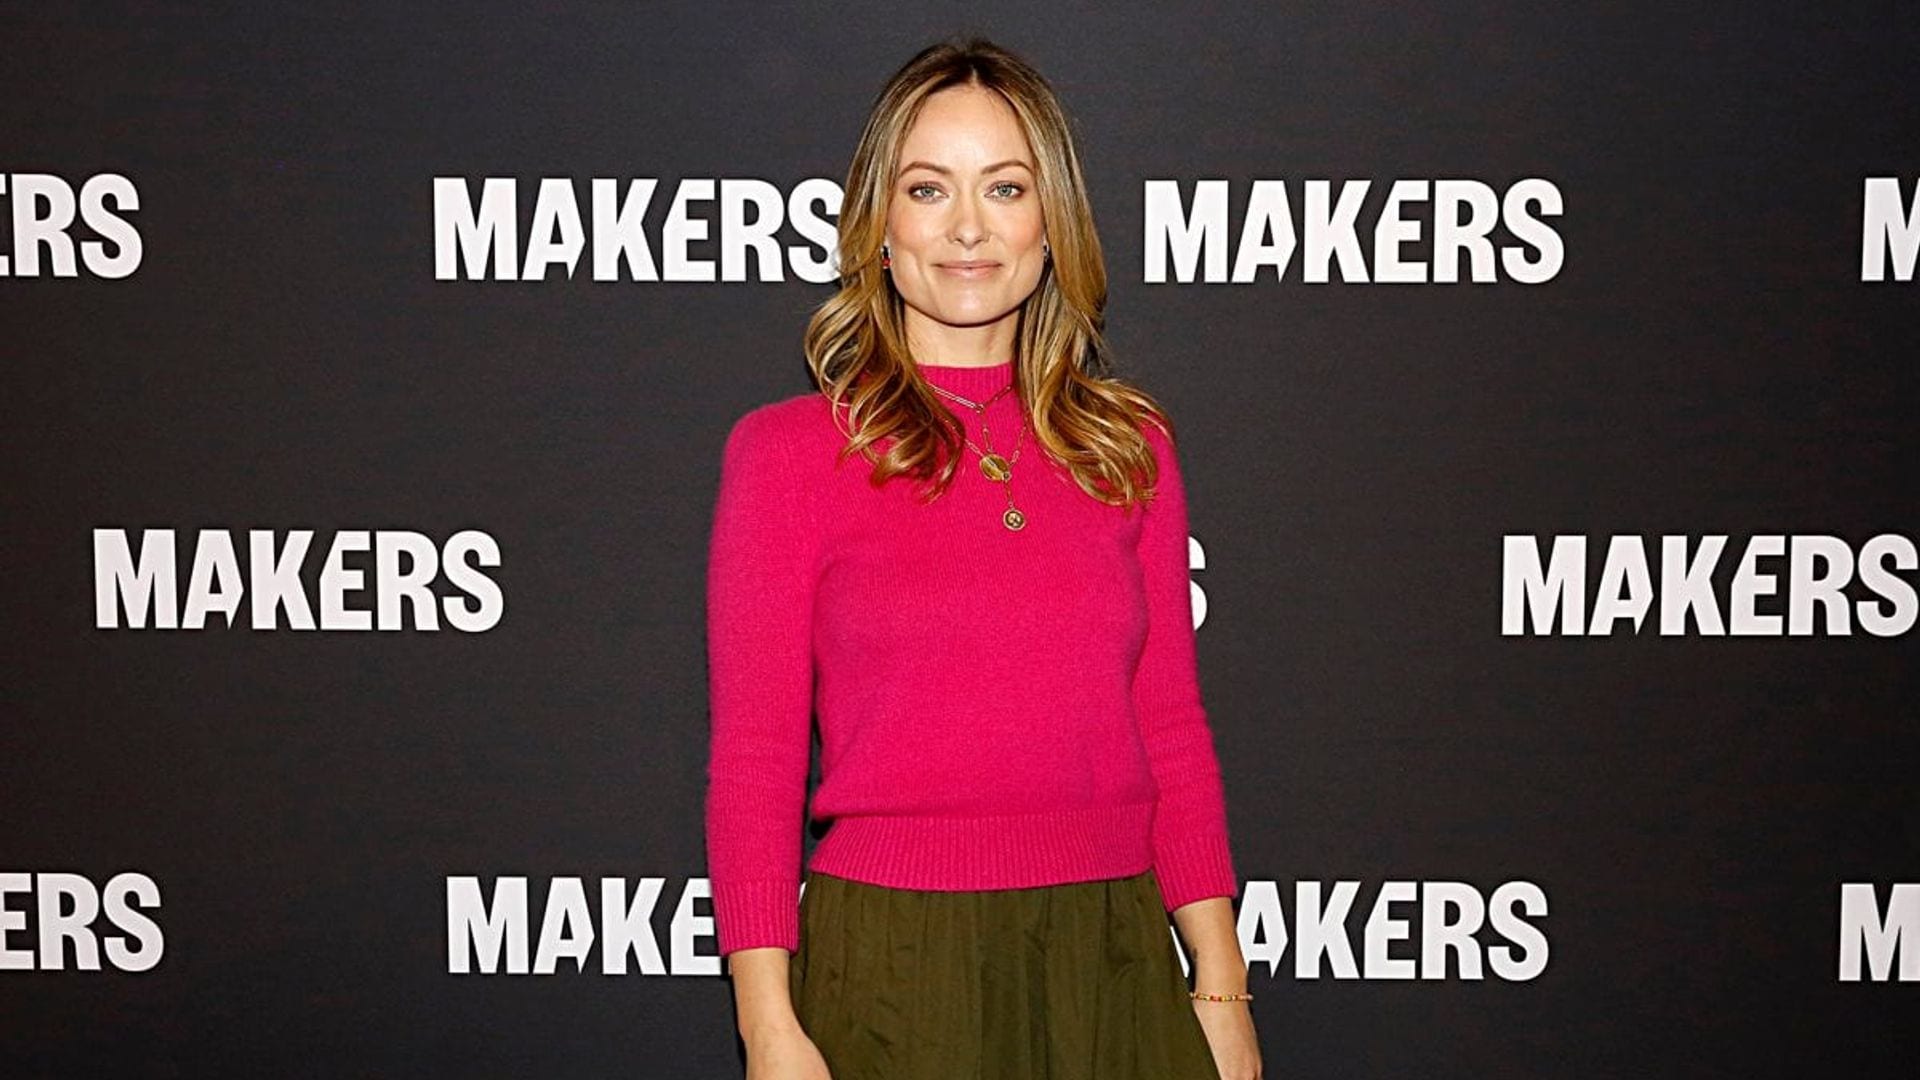 Olivia Wilde fired a well-known actor from her movie due to his “off-putting” behavior